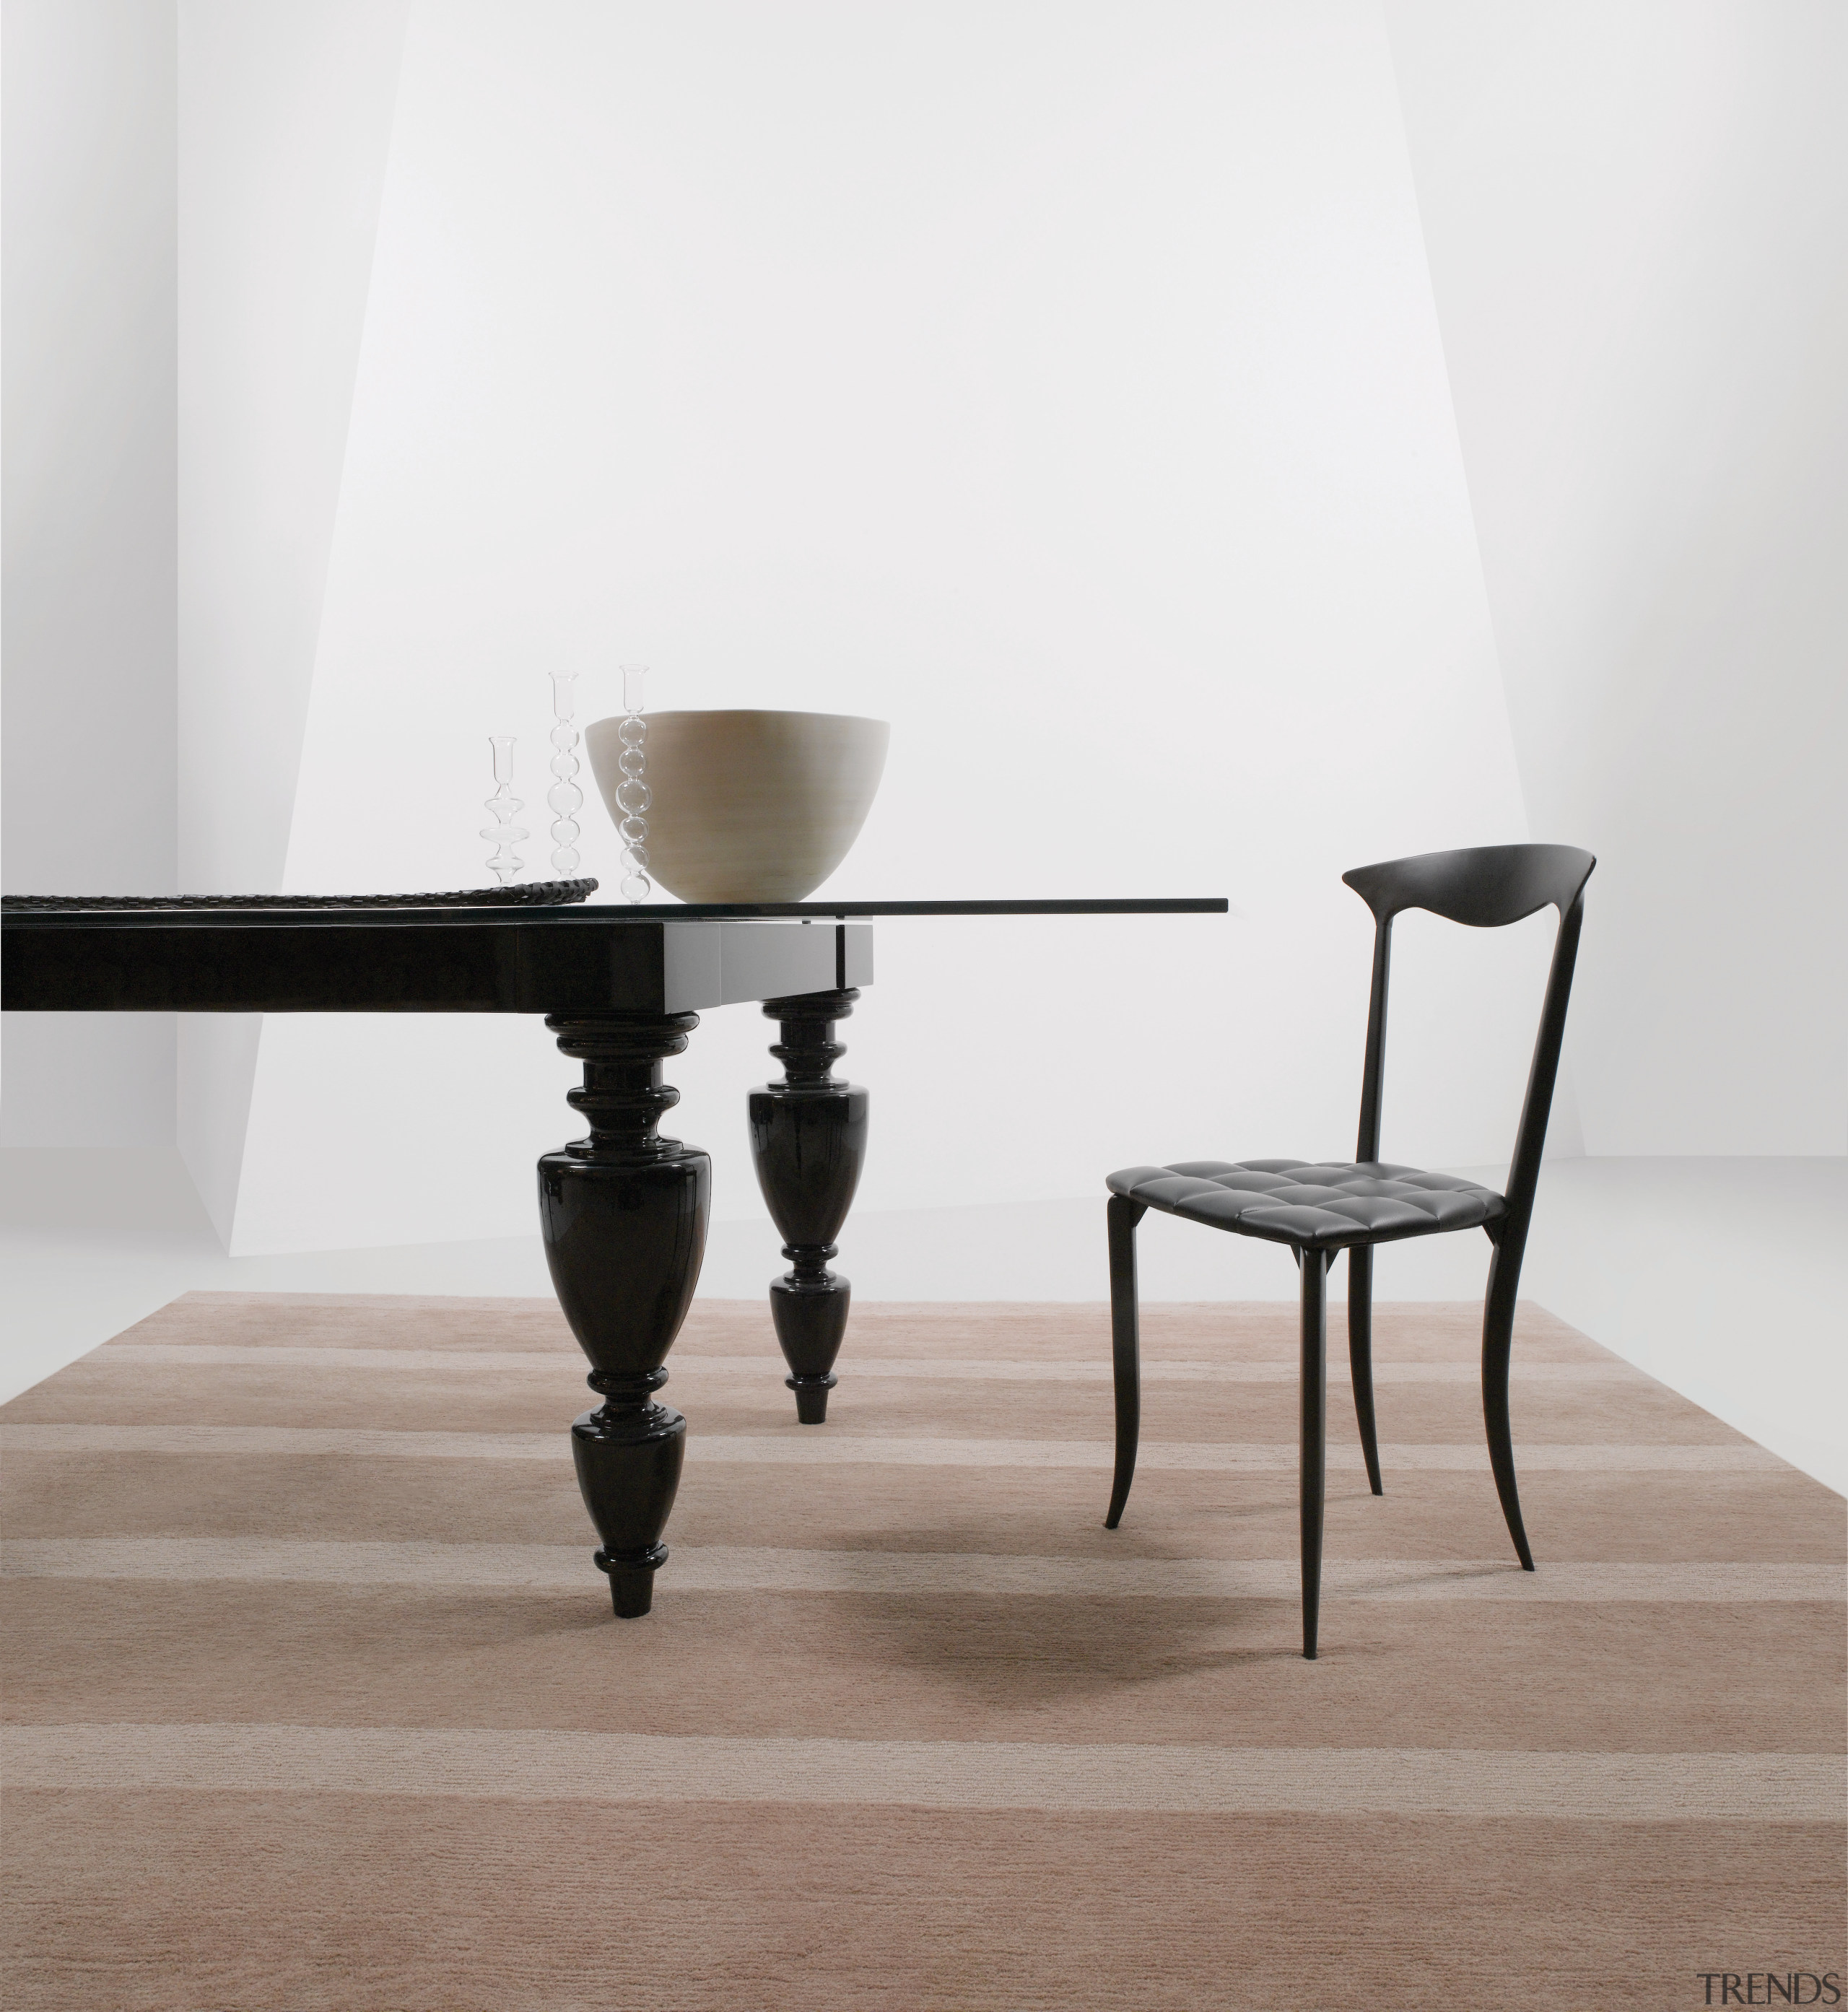 A view of some furniture from Domus Design. chair, coffee table, end table, floor, furniture, product design, table, white